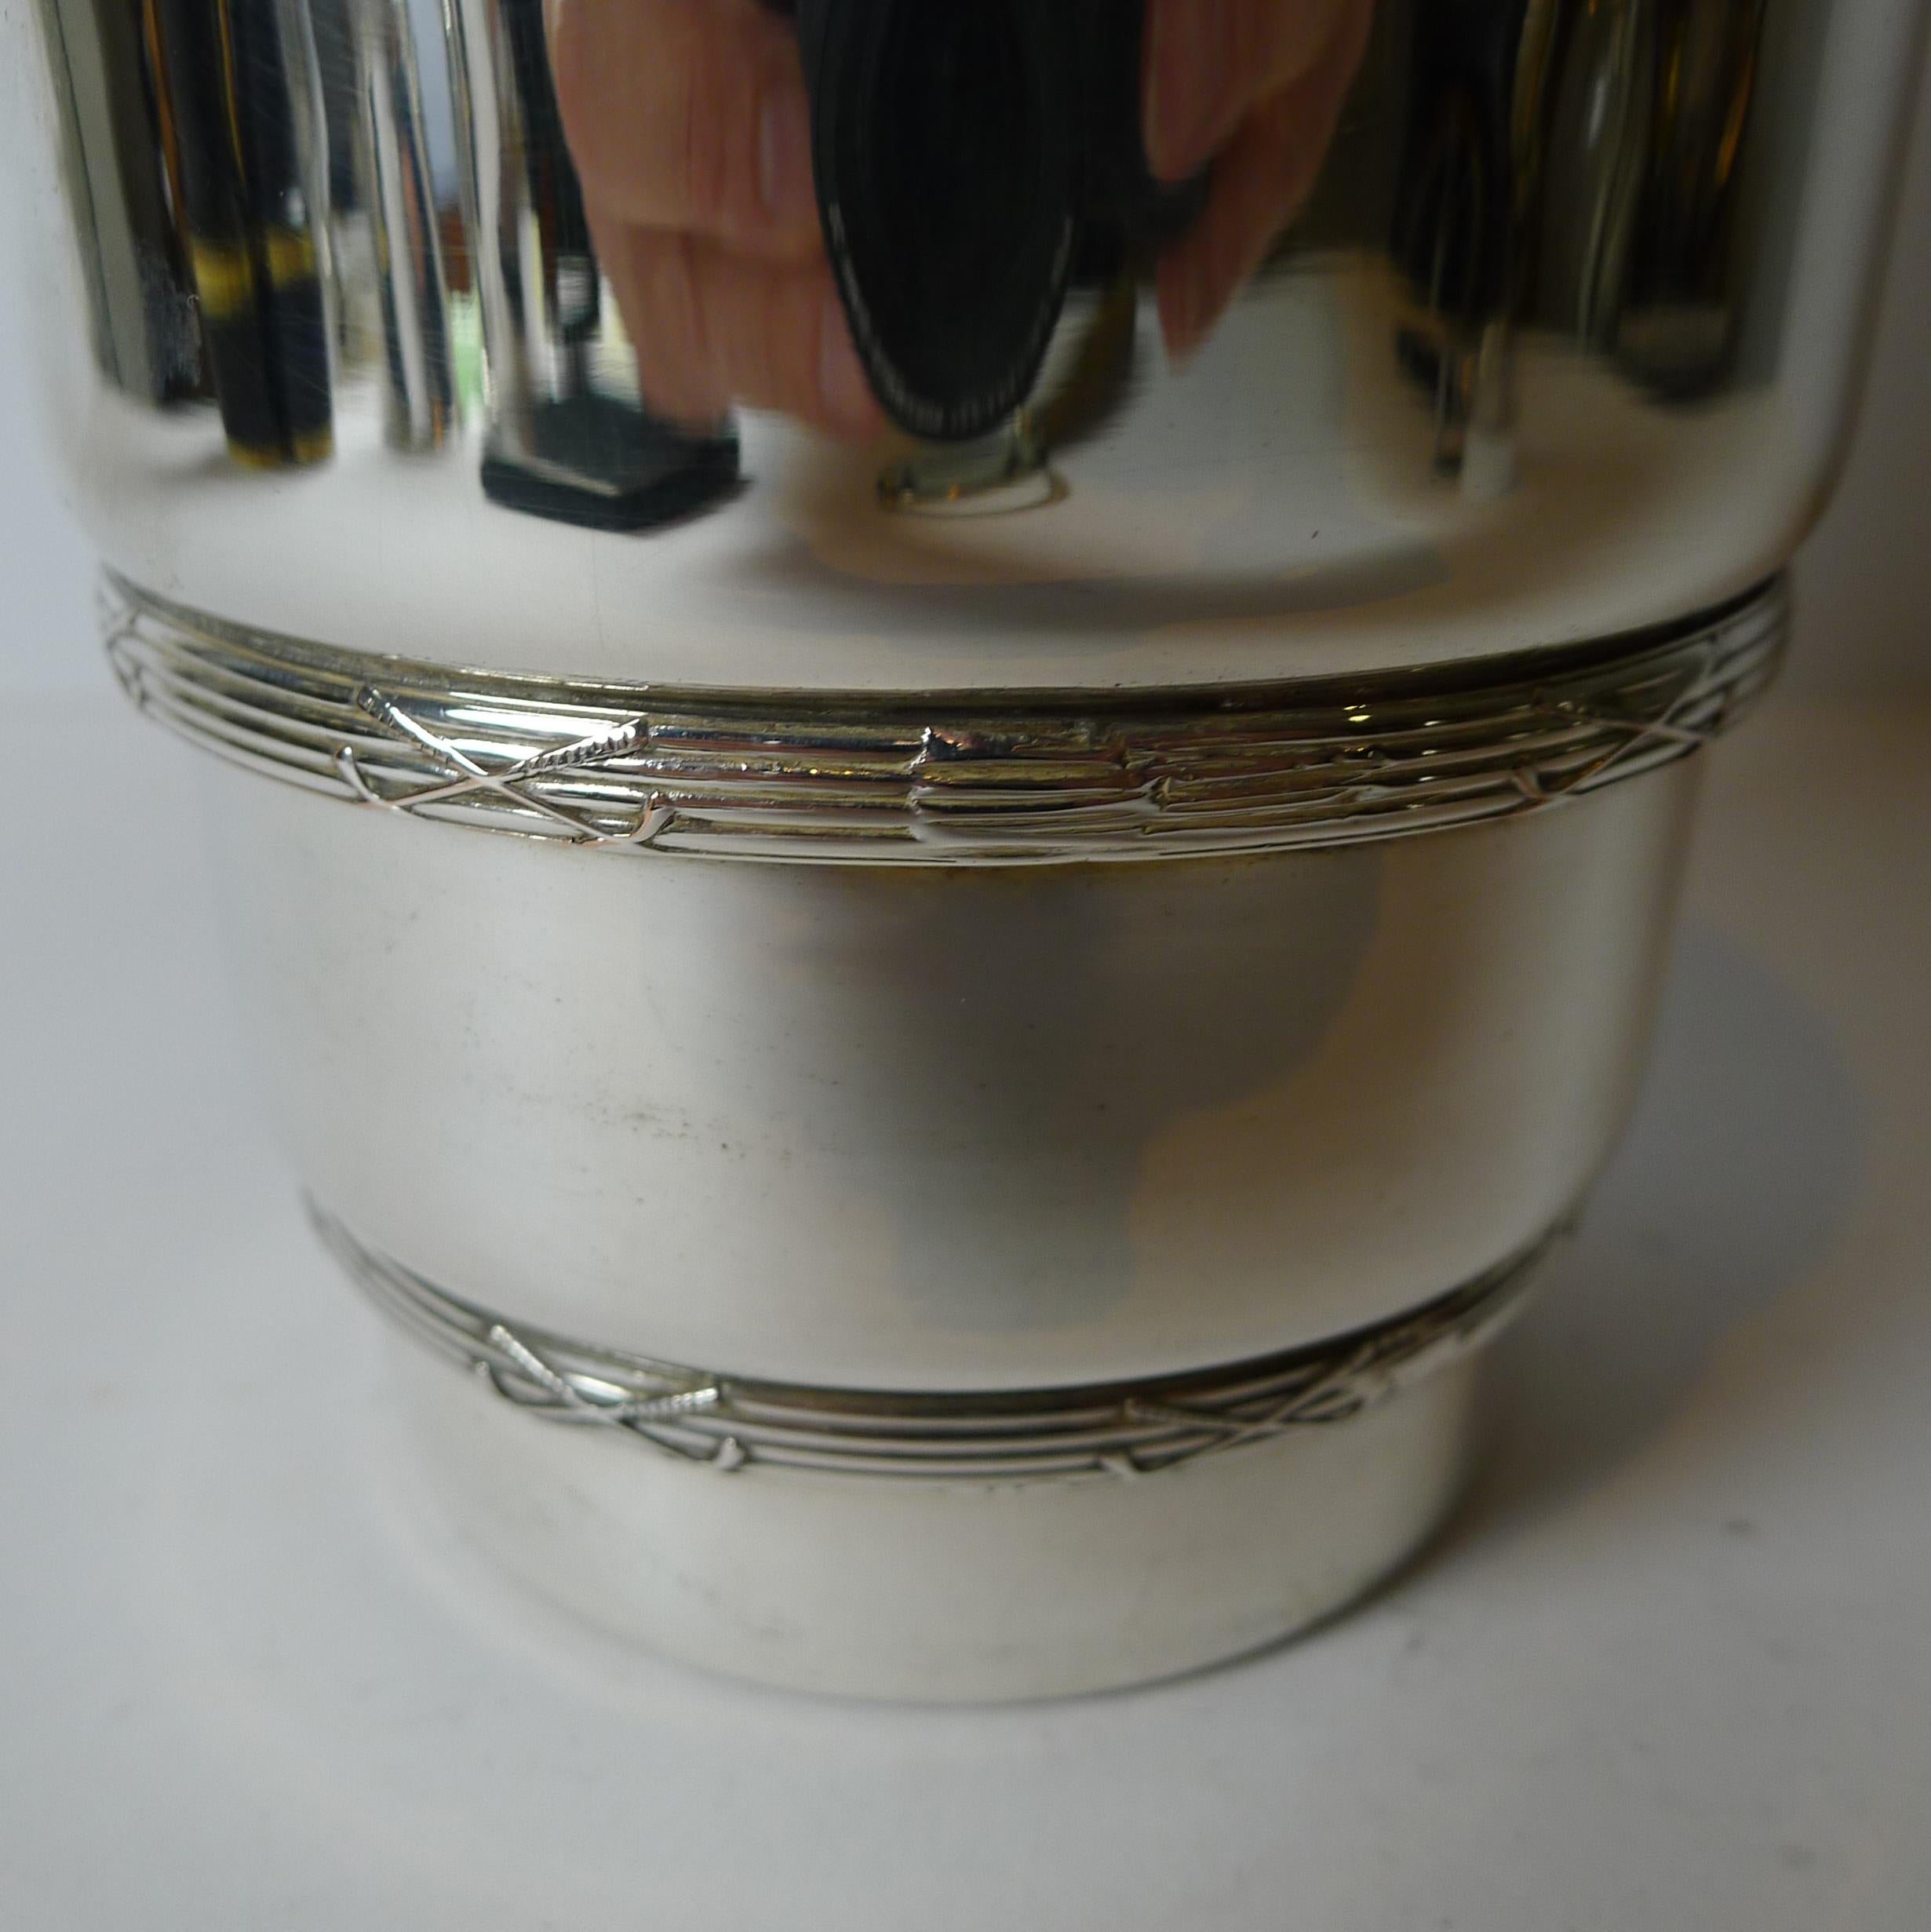 A magnificent Golf inspired cocktail shaker, made from silver plate by the well renowned silversmith, James Dixon & Sons, fully signed on the underside.

The top is in the form of a golf ball and the linear raised decoration the base is enhanced all